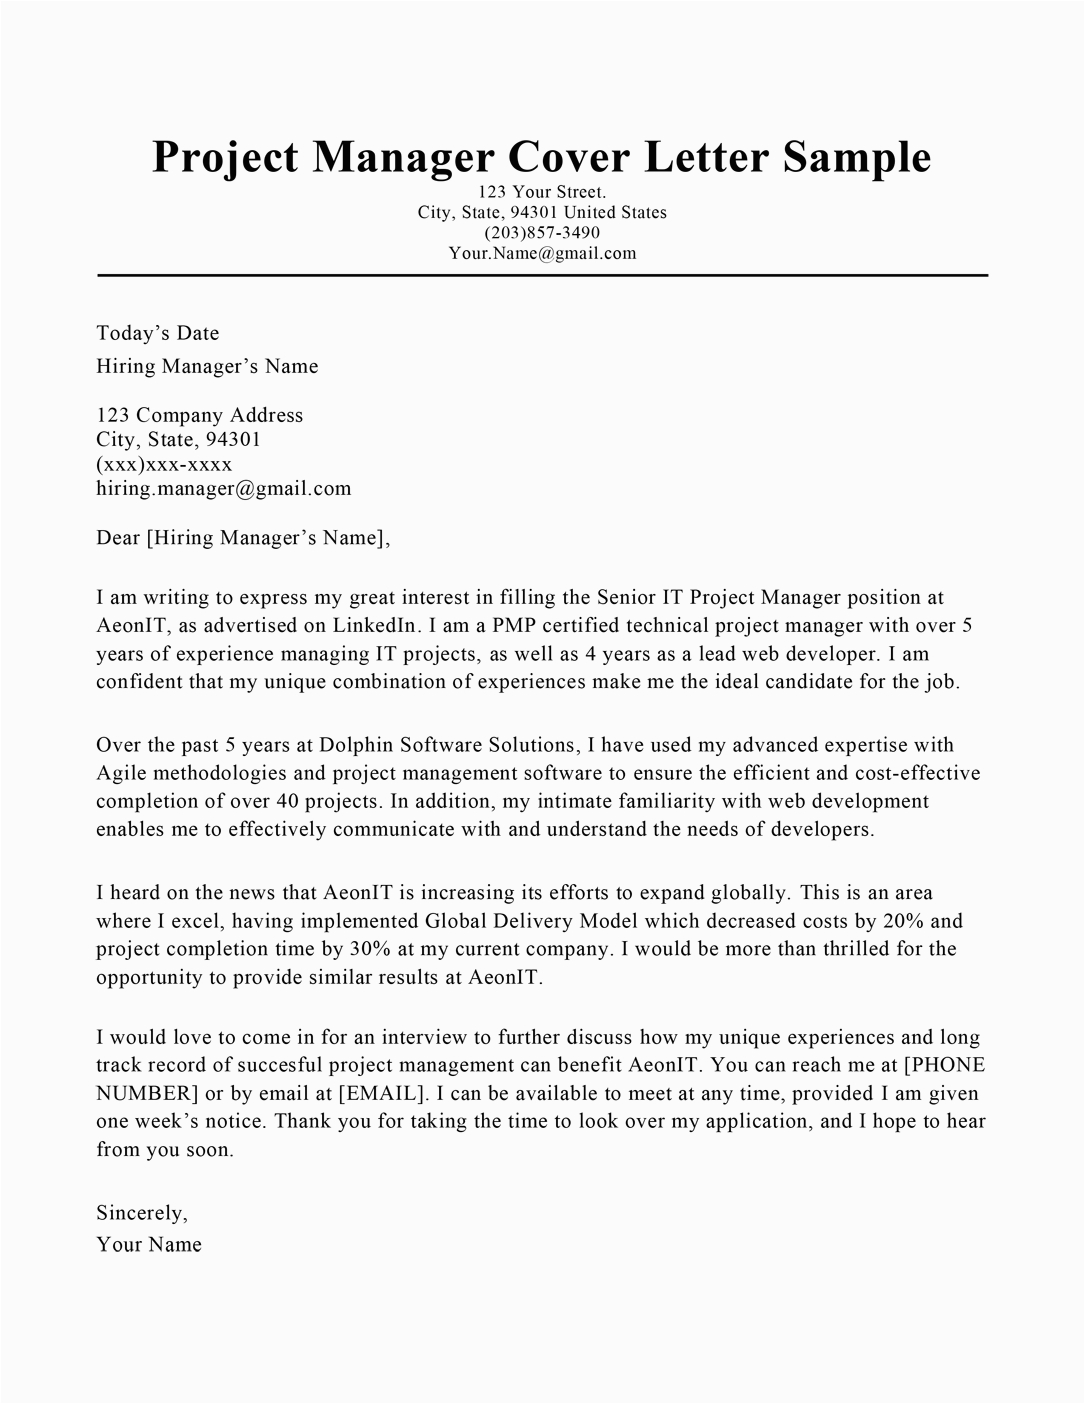 Sample Project Manager Cover Letter for Resume Project Manager Cover Letter Sample & Tips